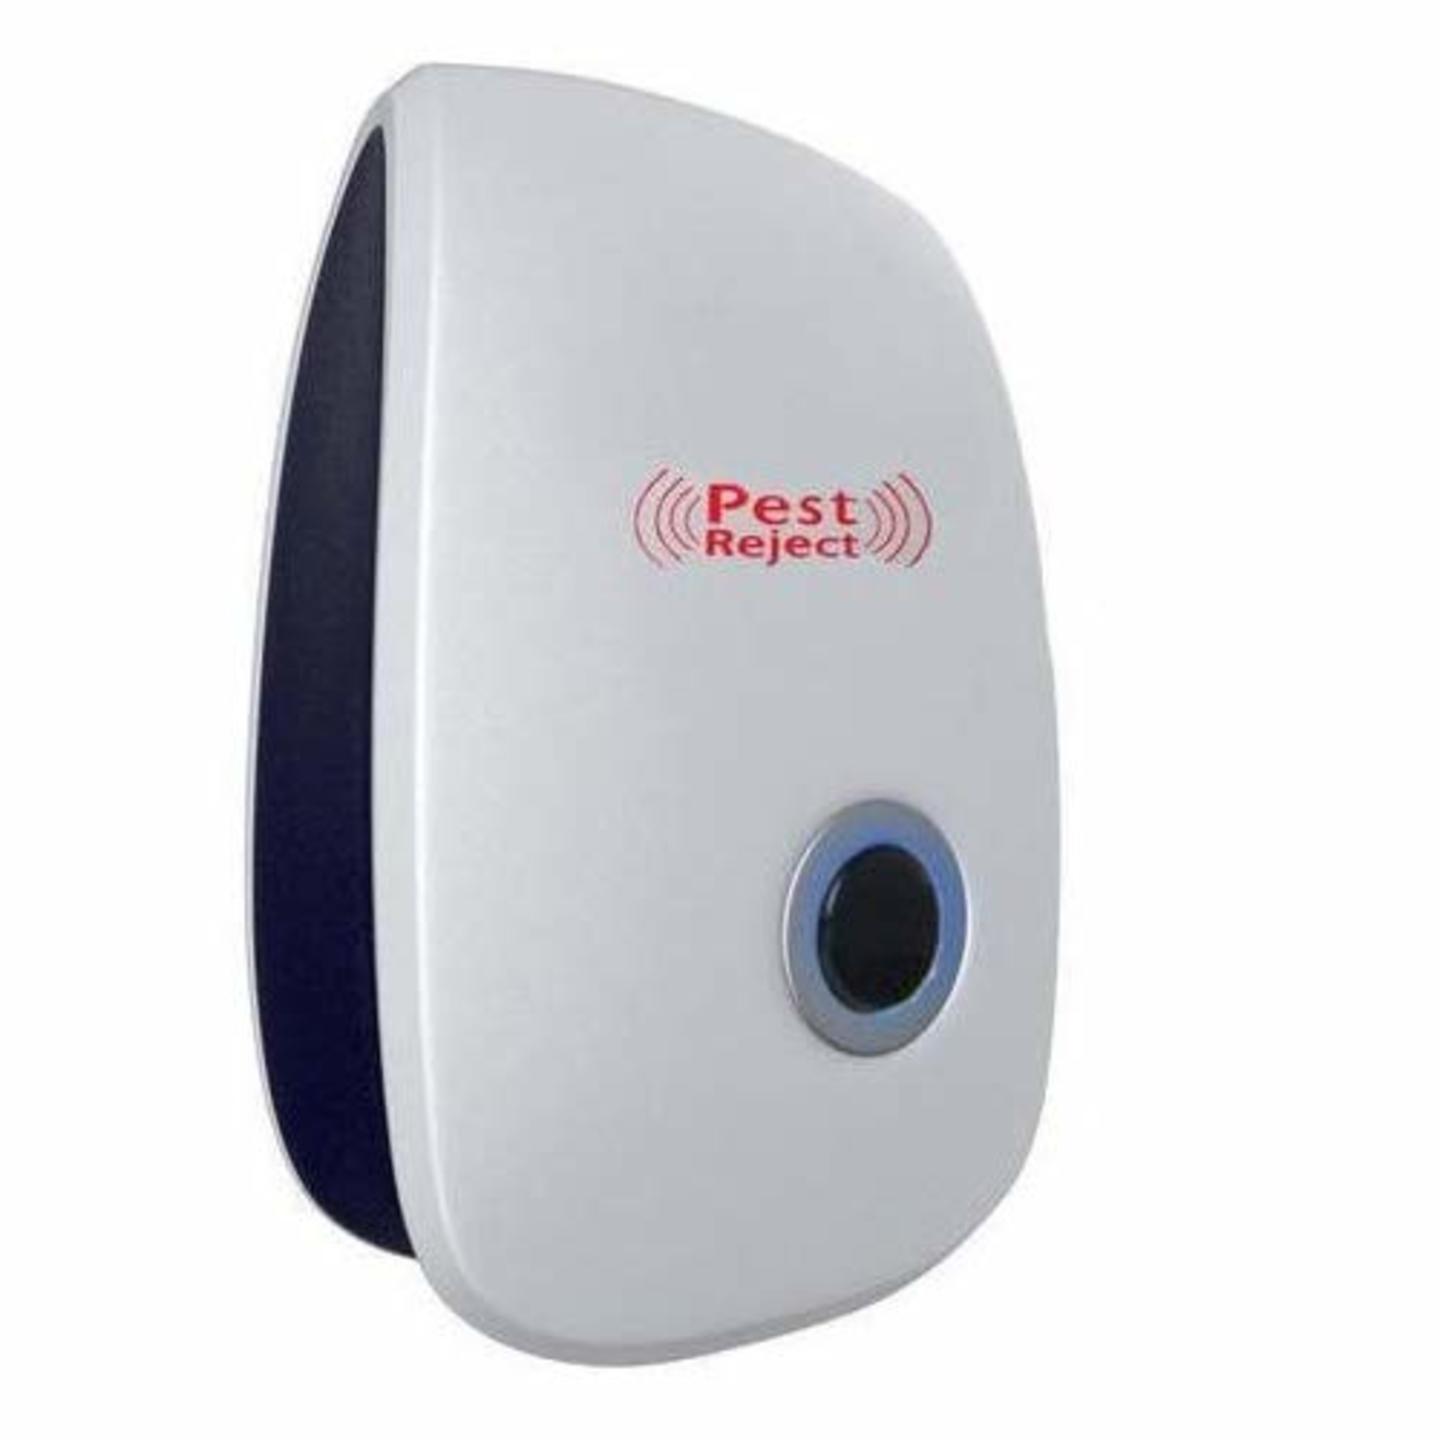 Ultrasonic Pest Repeller for Mice, Roaches, Ant & Mosquitoes